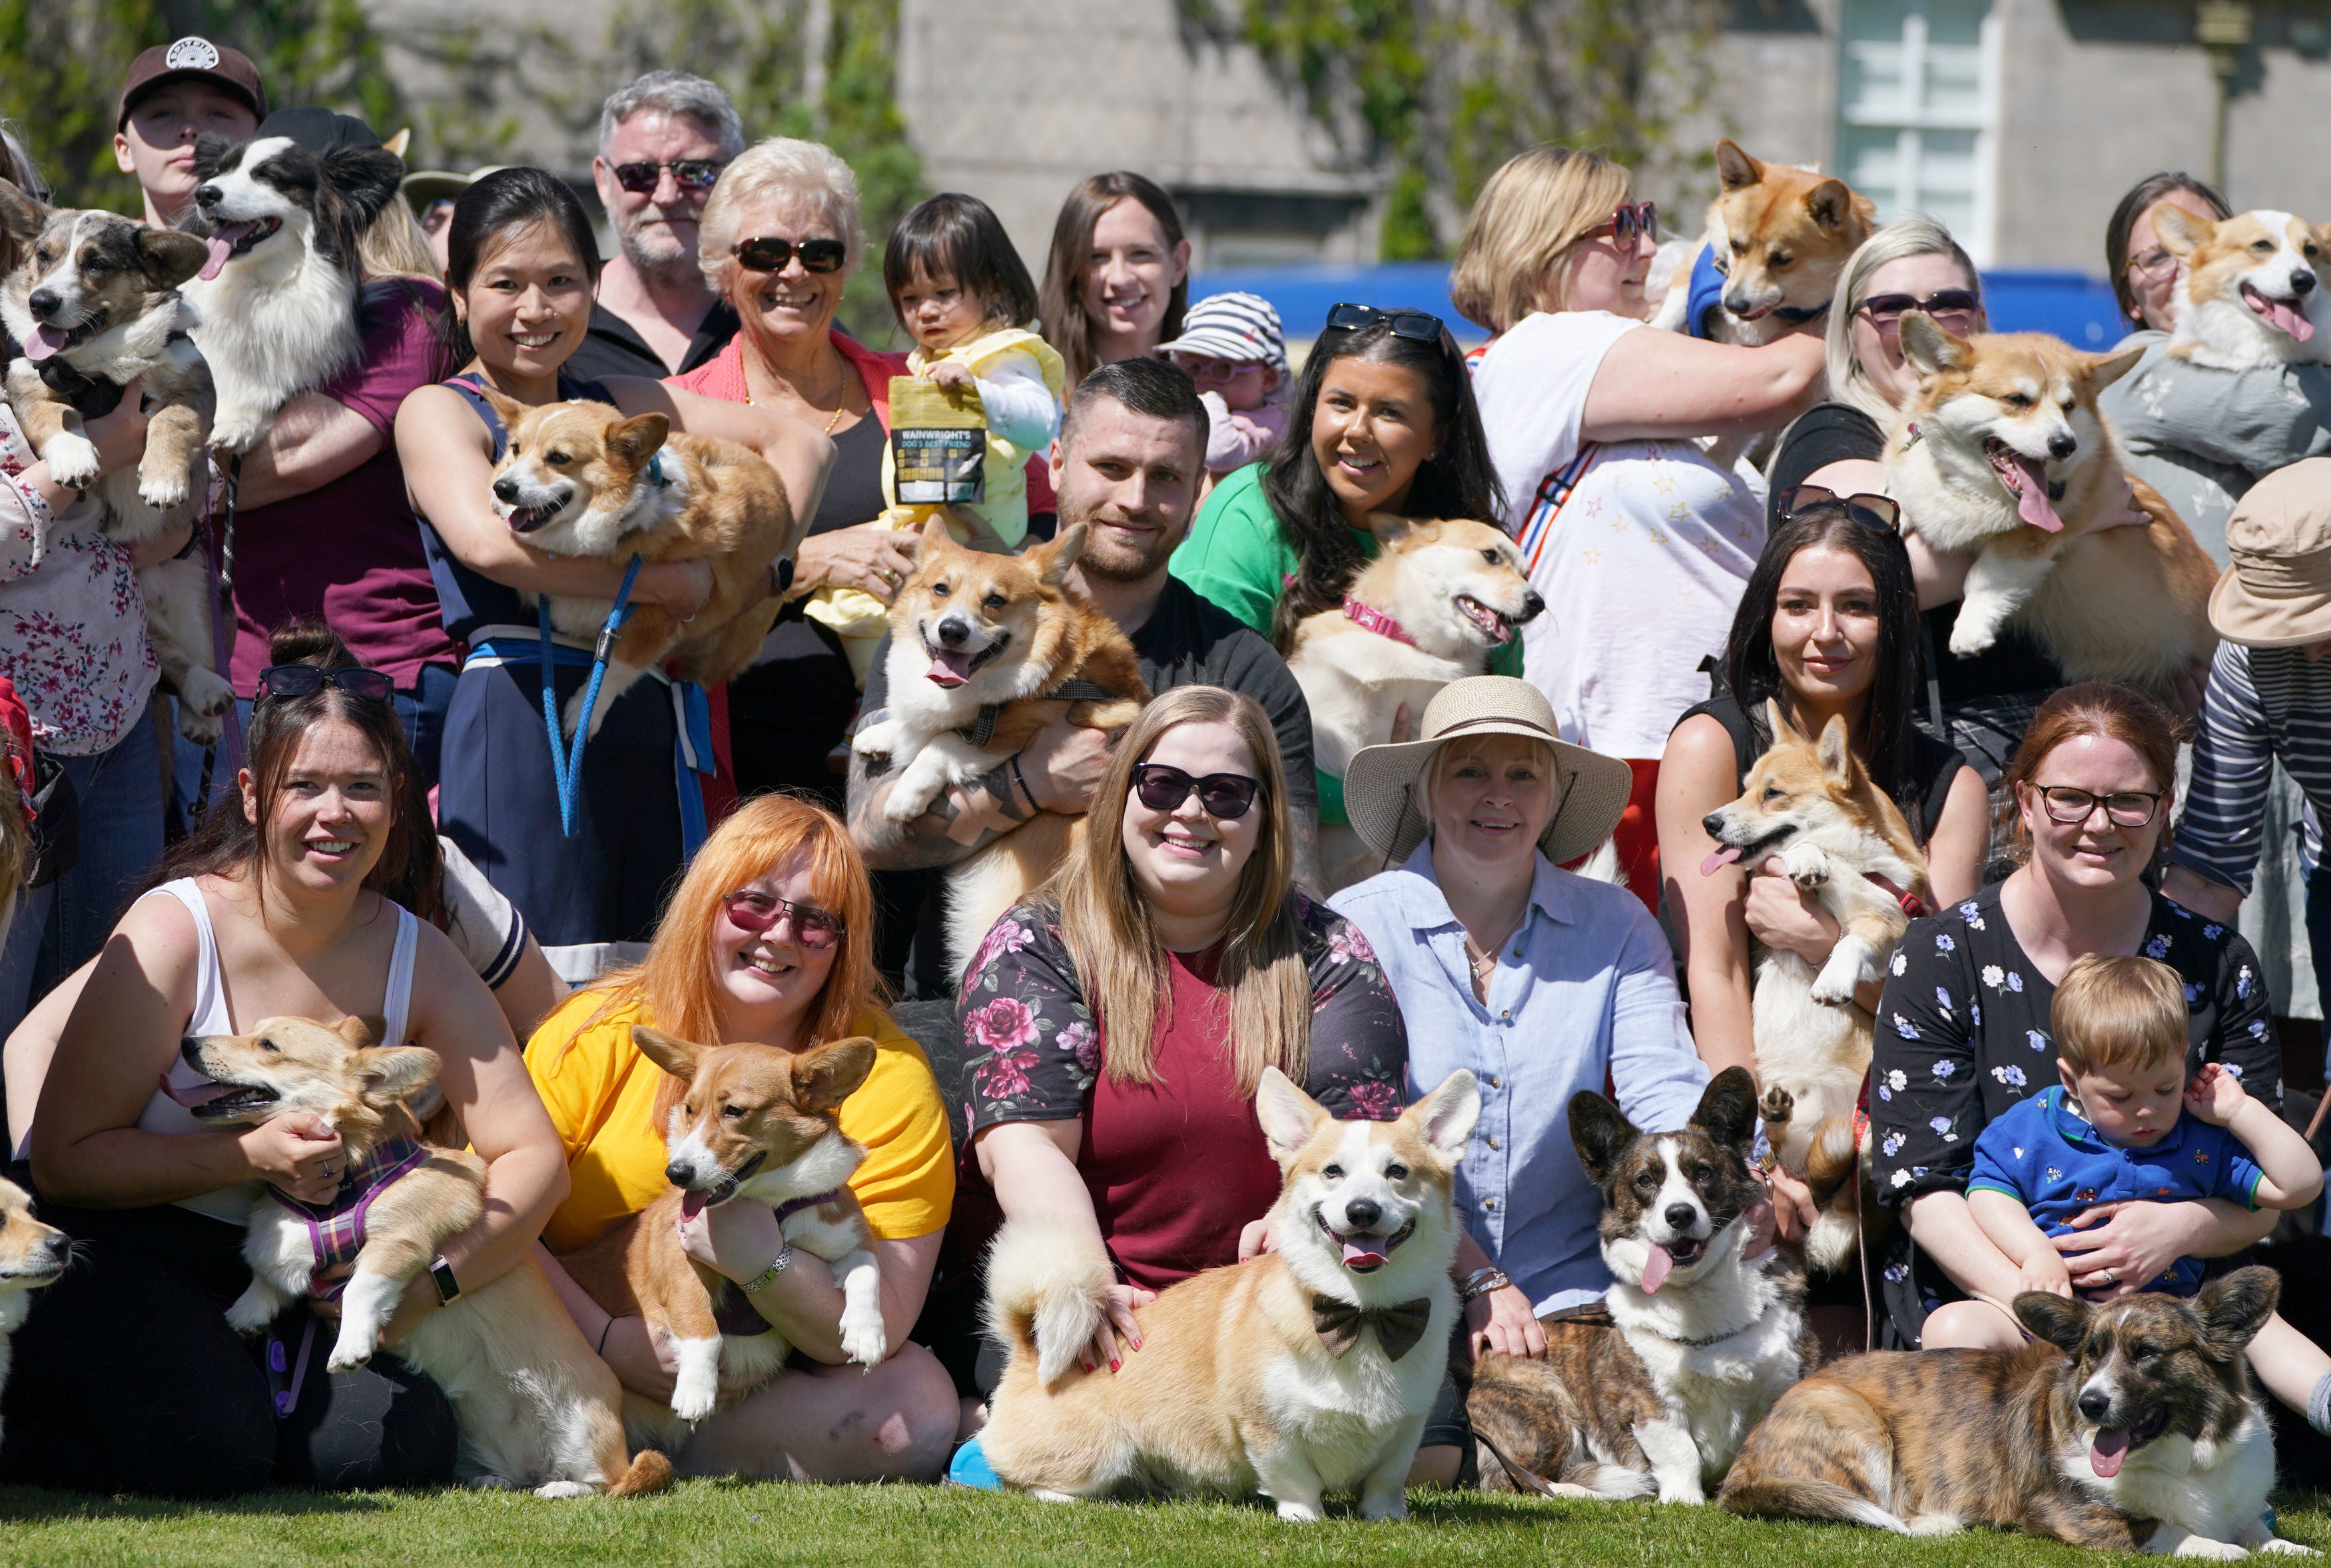 70 corgis posed on the front lawn at Balmoral during an event with the Corgi Society of Scotland to mark Queen Elizabeth II's Platinum Jubilee